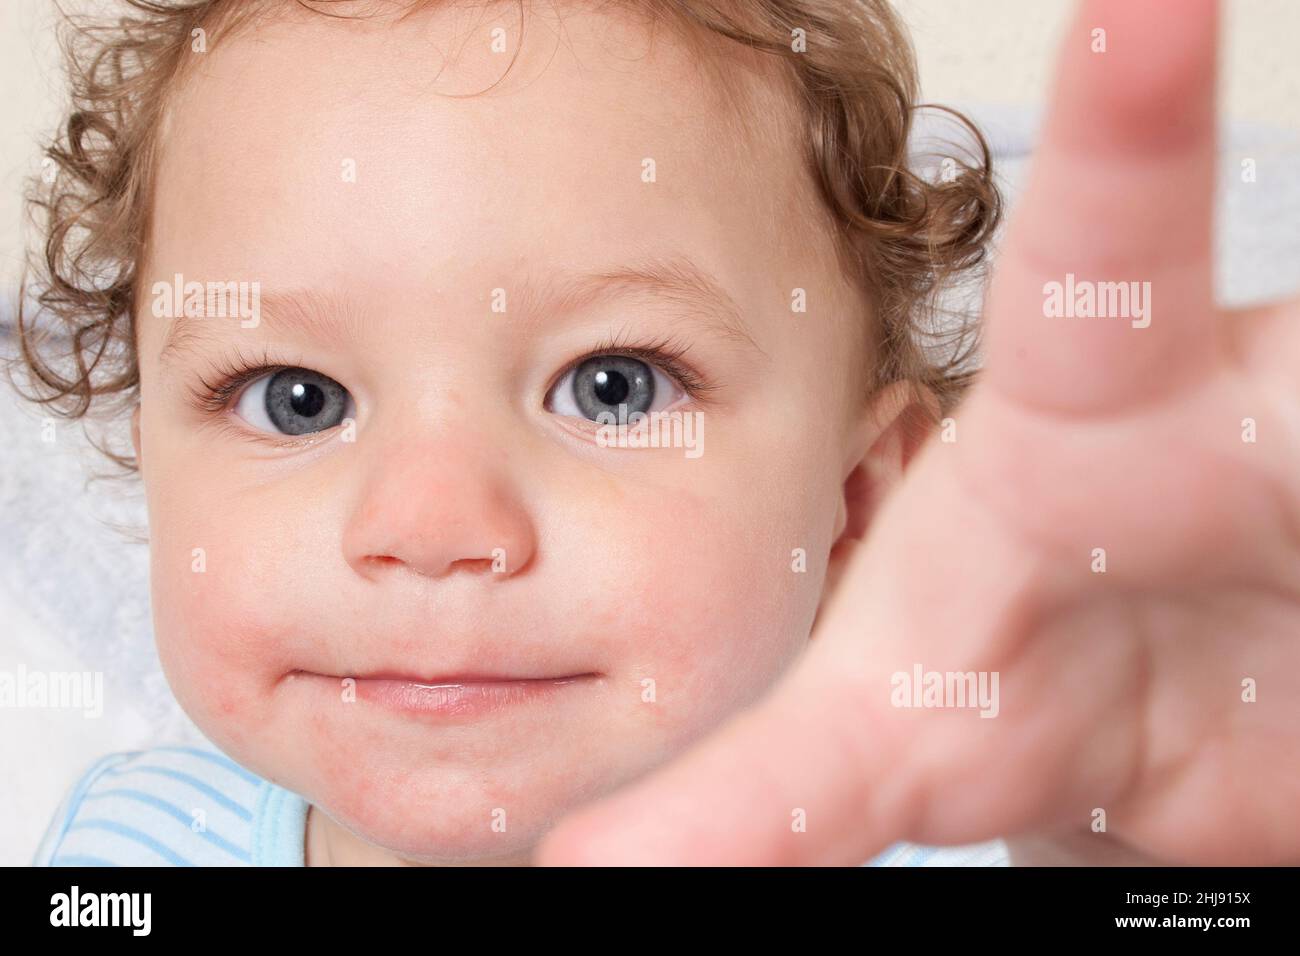 cheeky baby thrusting his hand into camera Stock Photo